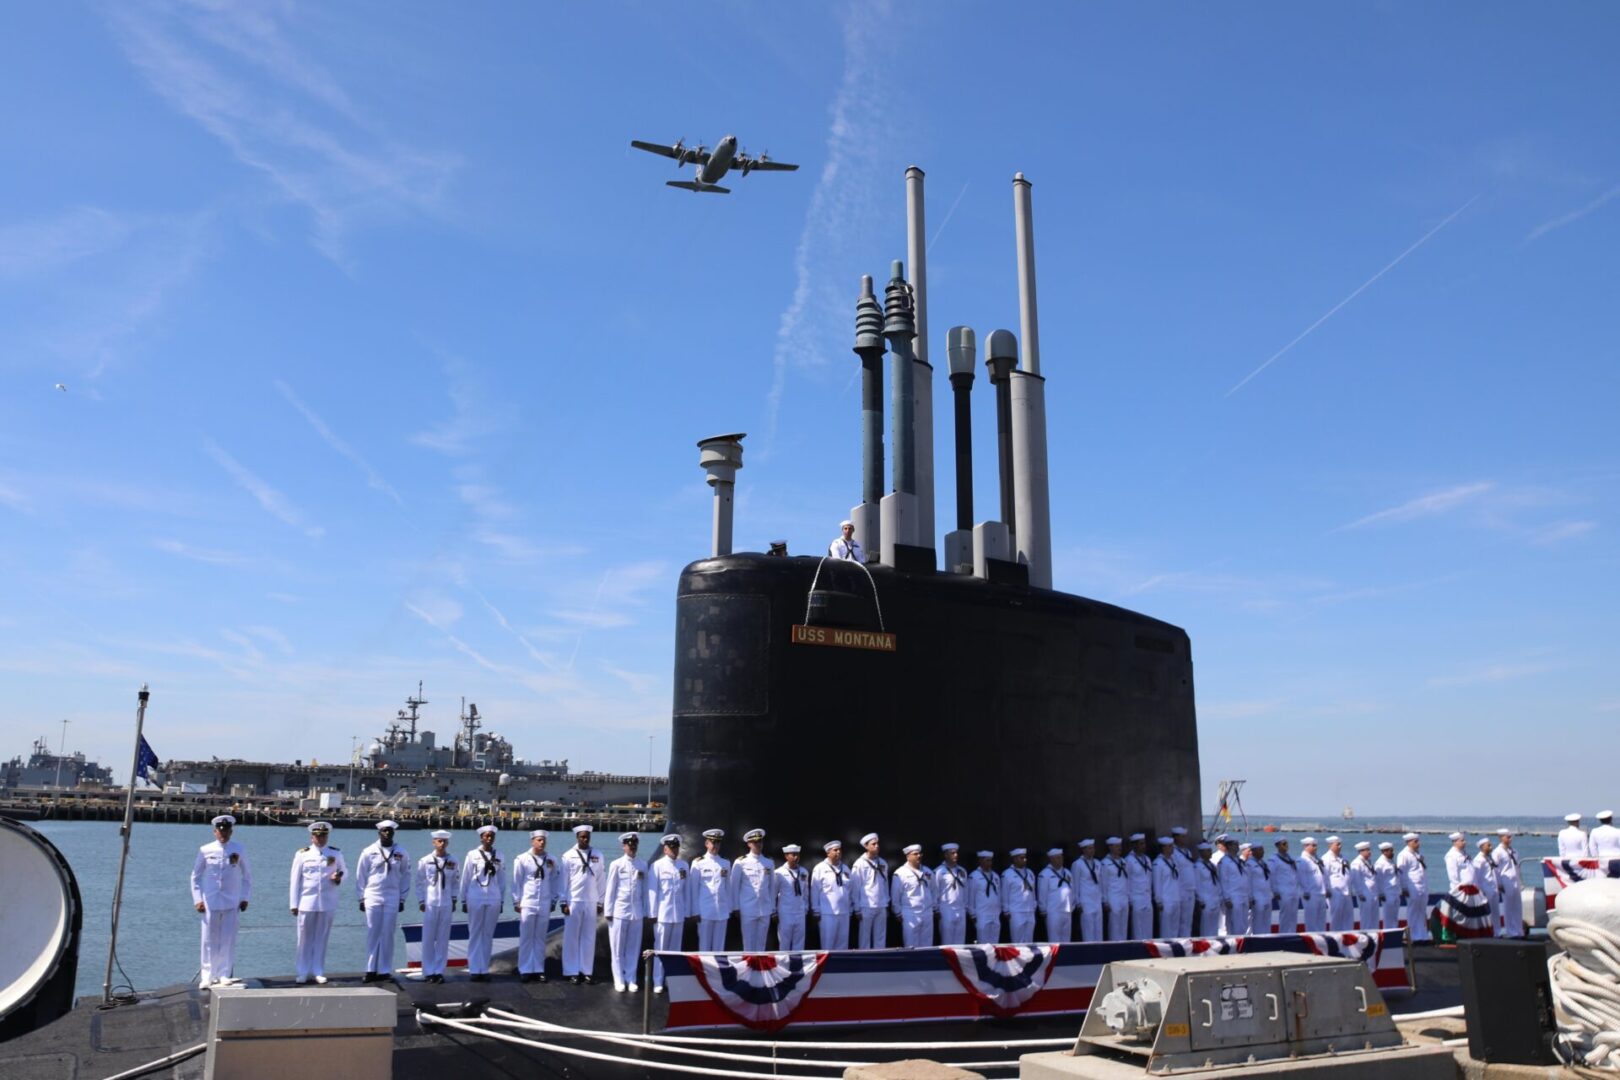 NORFOLK (June 25, 2022) Sailors attached to the Virginia-class fast attack submarine USS Montana (SSN 794) man the boat during a commissioning ceremony in Norfolk, Va., June 25, 2022. SSN-794, the second U.S Navy vessel launched with the name Montana and first in more than a century, is a flexible, multi-mission platform designed to carry out the seven core competencies of the submarine force: anti-submarine warfare; anti-surface warfare; delivery of special operations forces; strike warfare; irregular warfare; intelligence, surveillance and reconnaissance; and mine warfare. (U.S. Navy photo by Senior Chief Mass Communication Specialist John Smolinski)